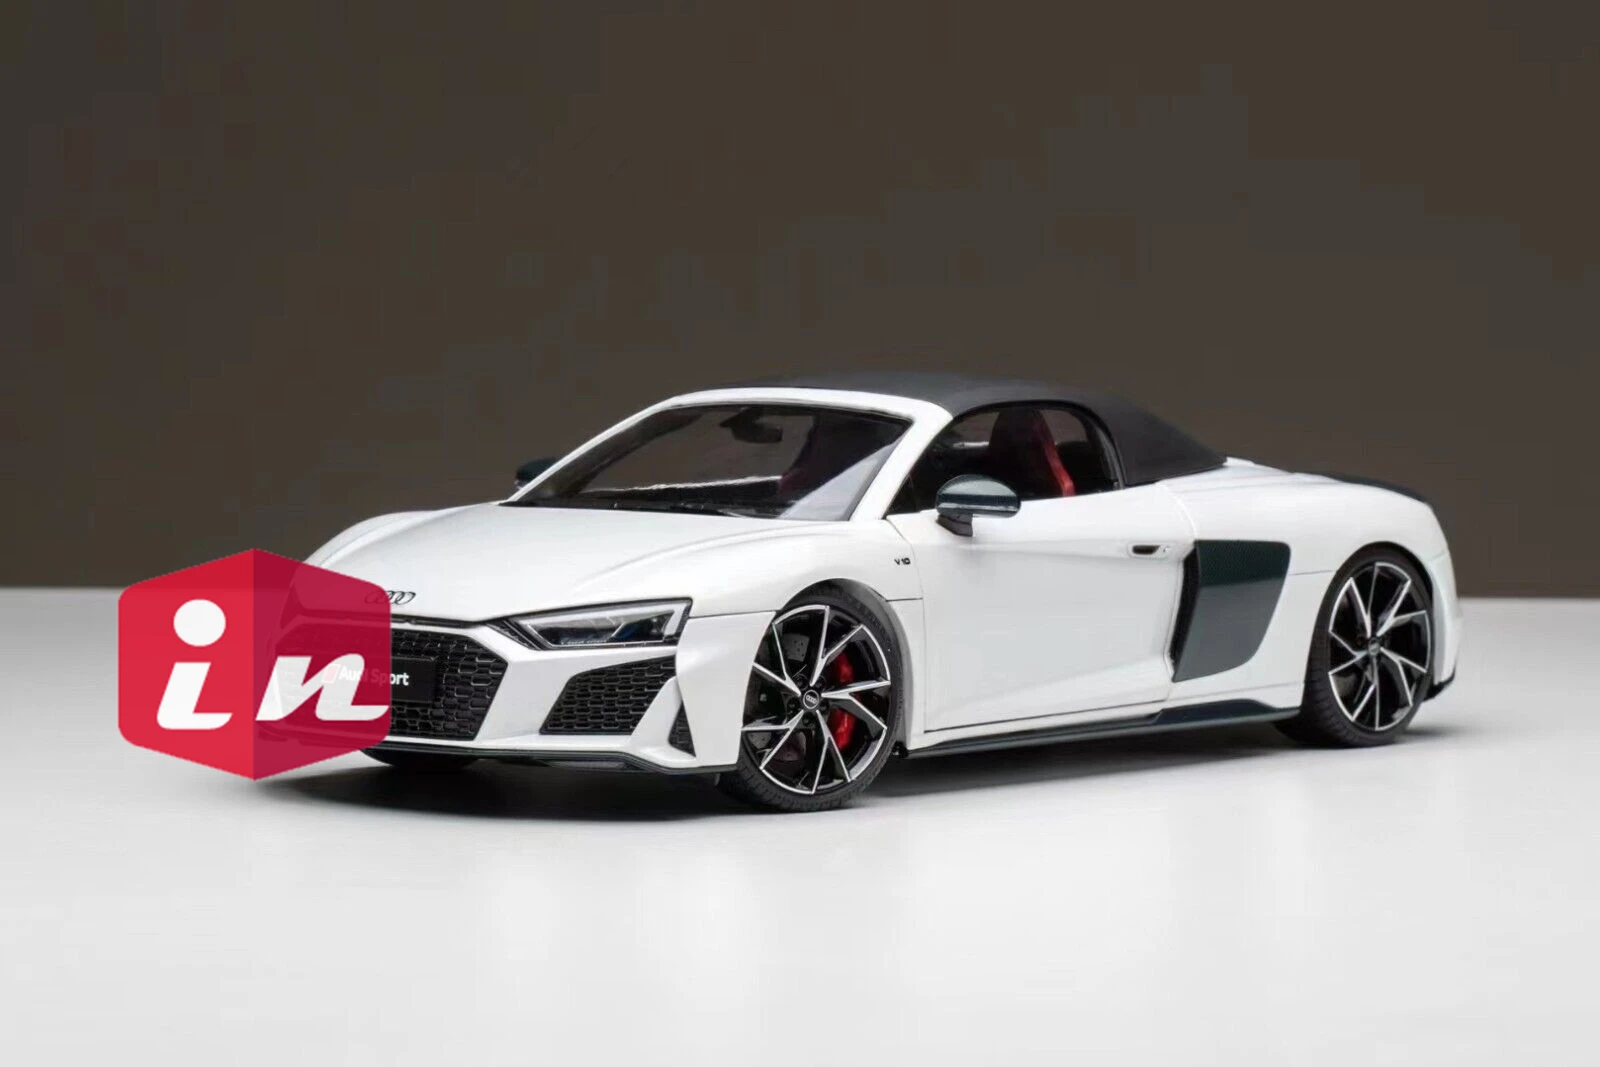 

R8 Spider Performance Nardo Gray Kengfai 1/18 White DieCast Model Car Collection Limited Edition Hobby Toys